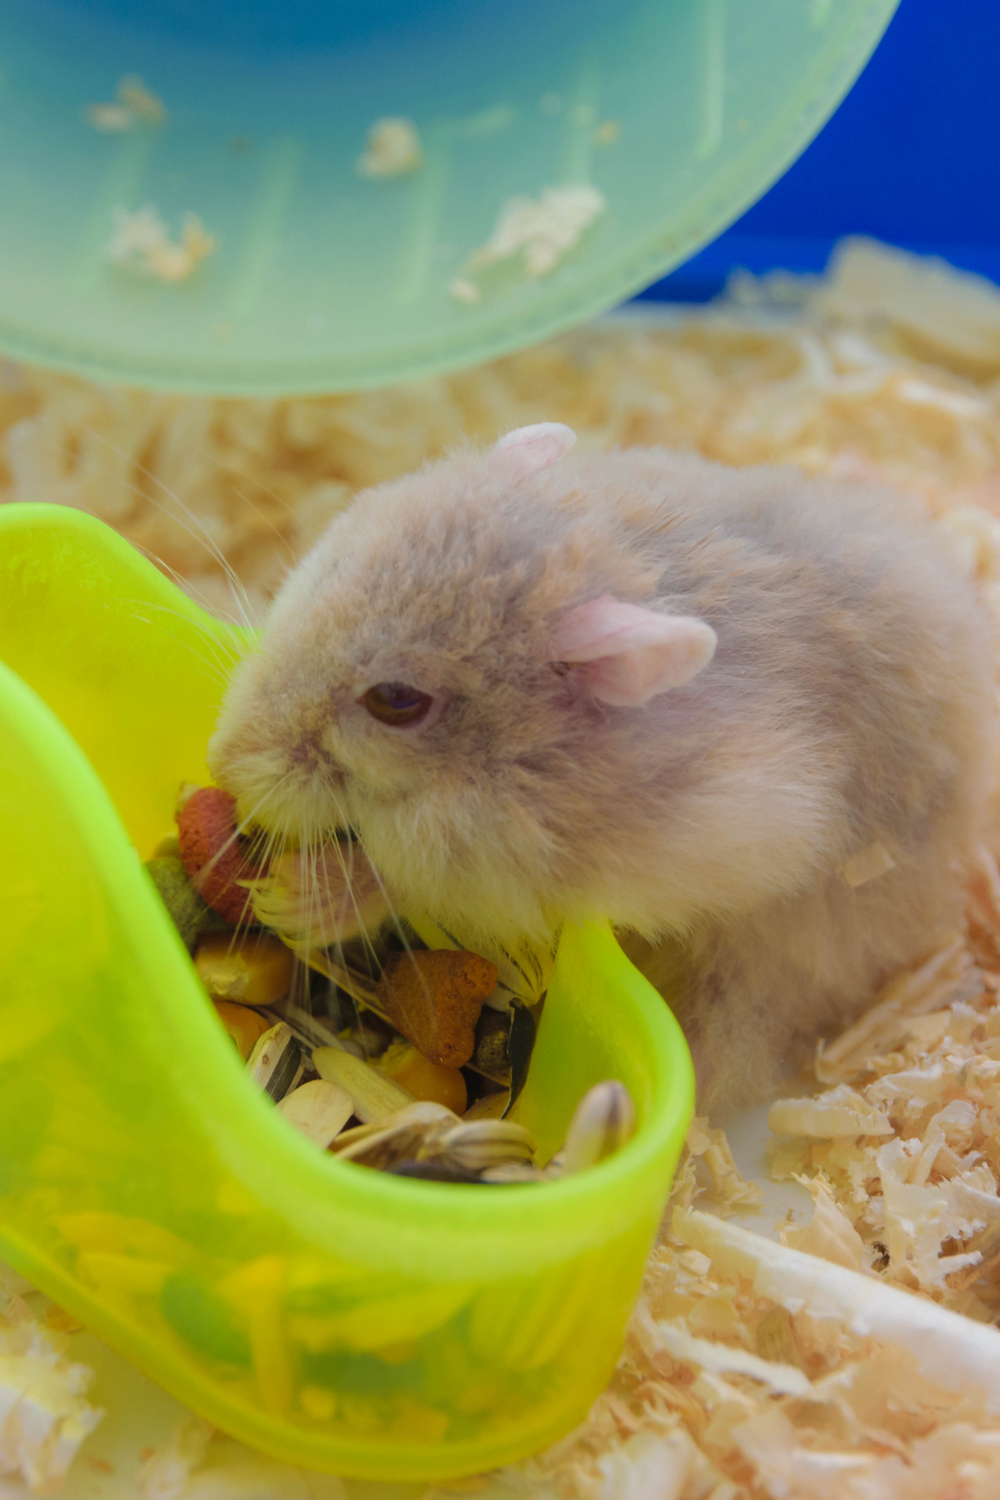 Other Tips for your Hamster's Health & Happiness